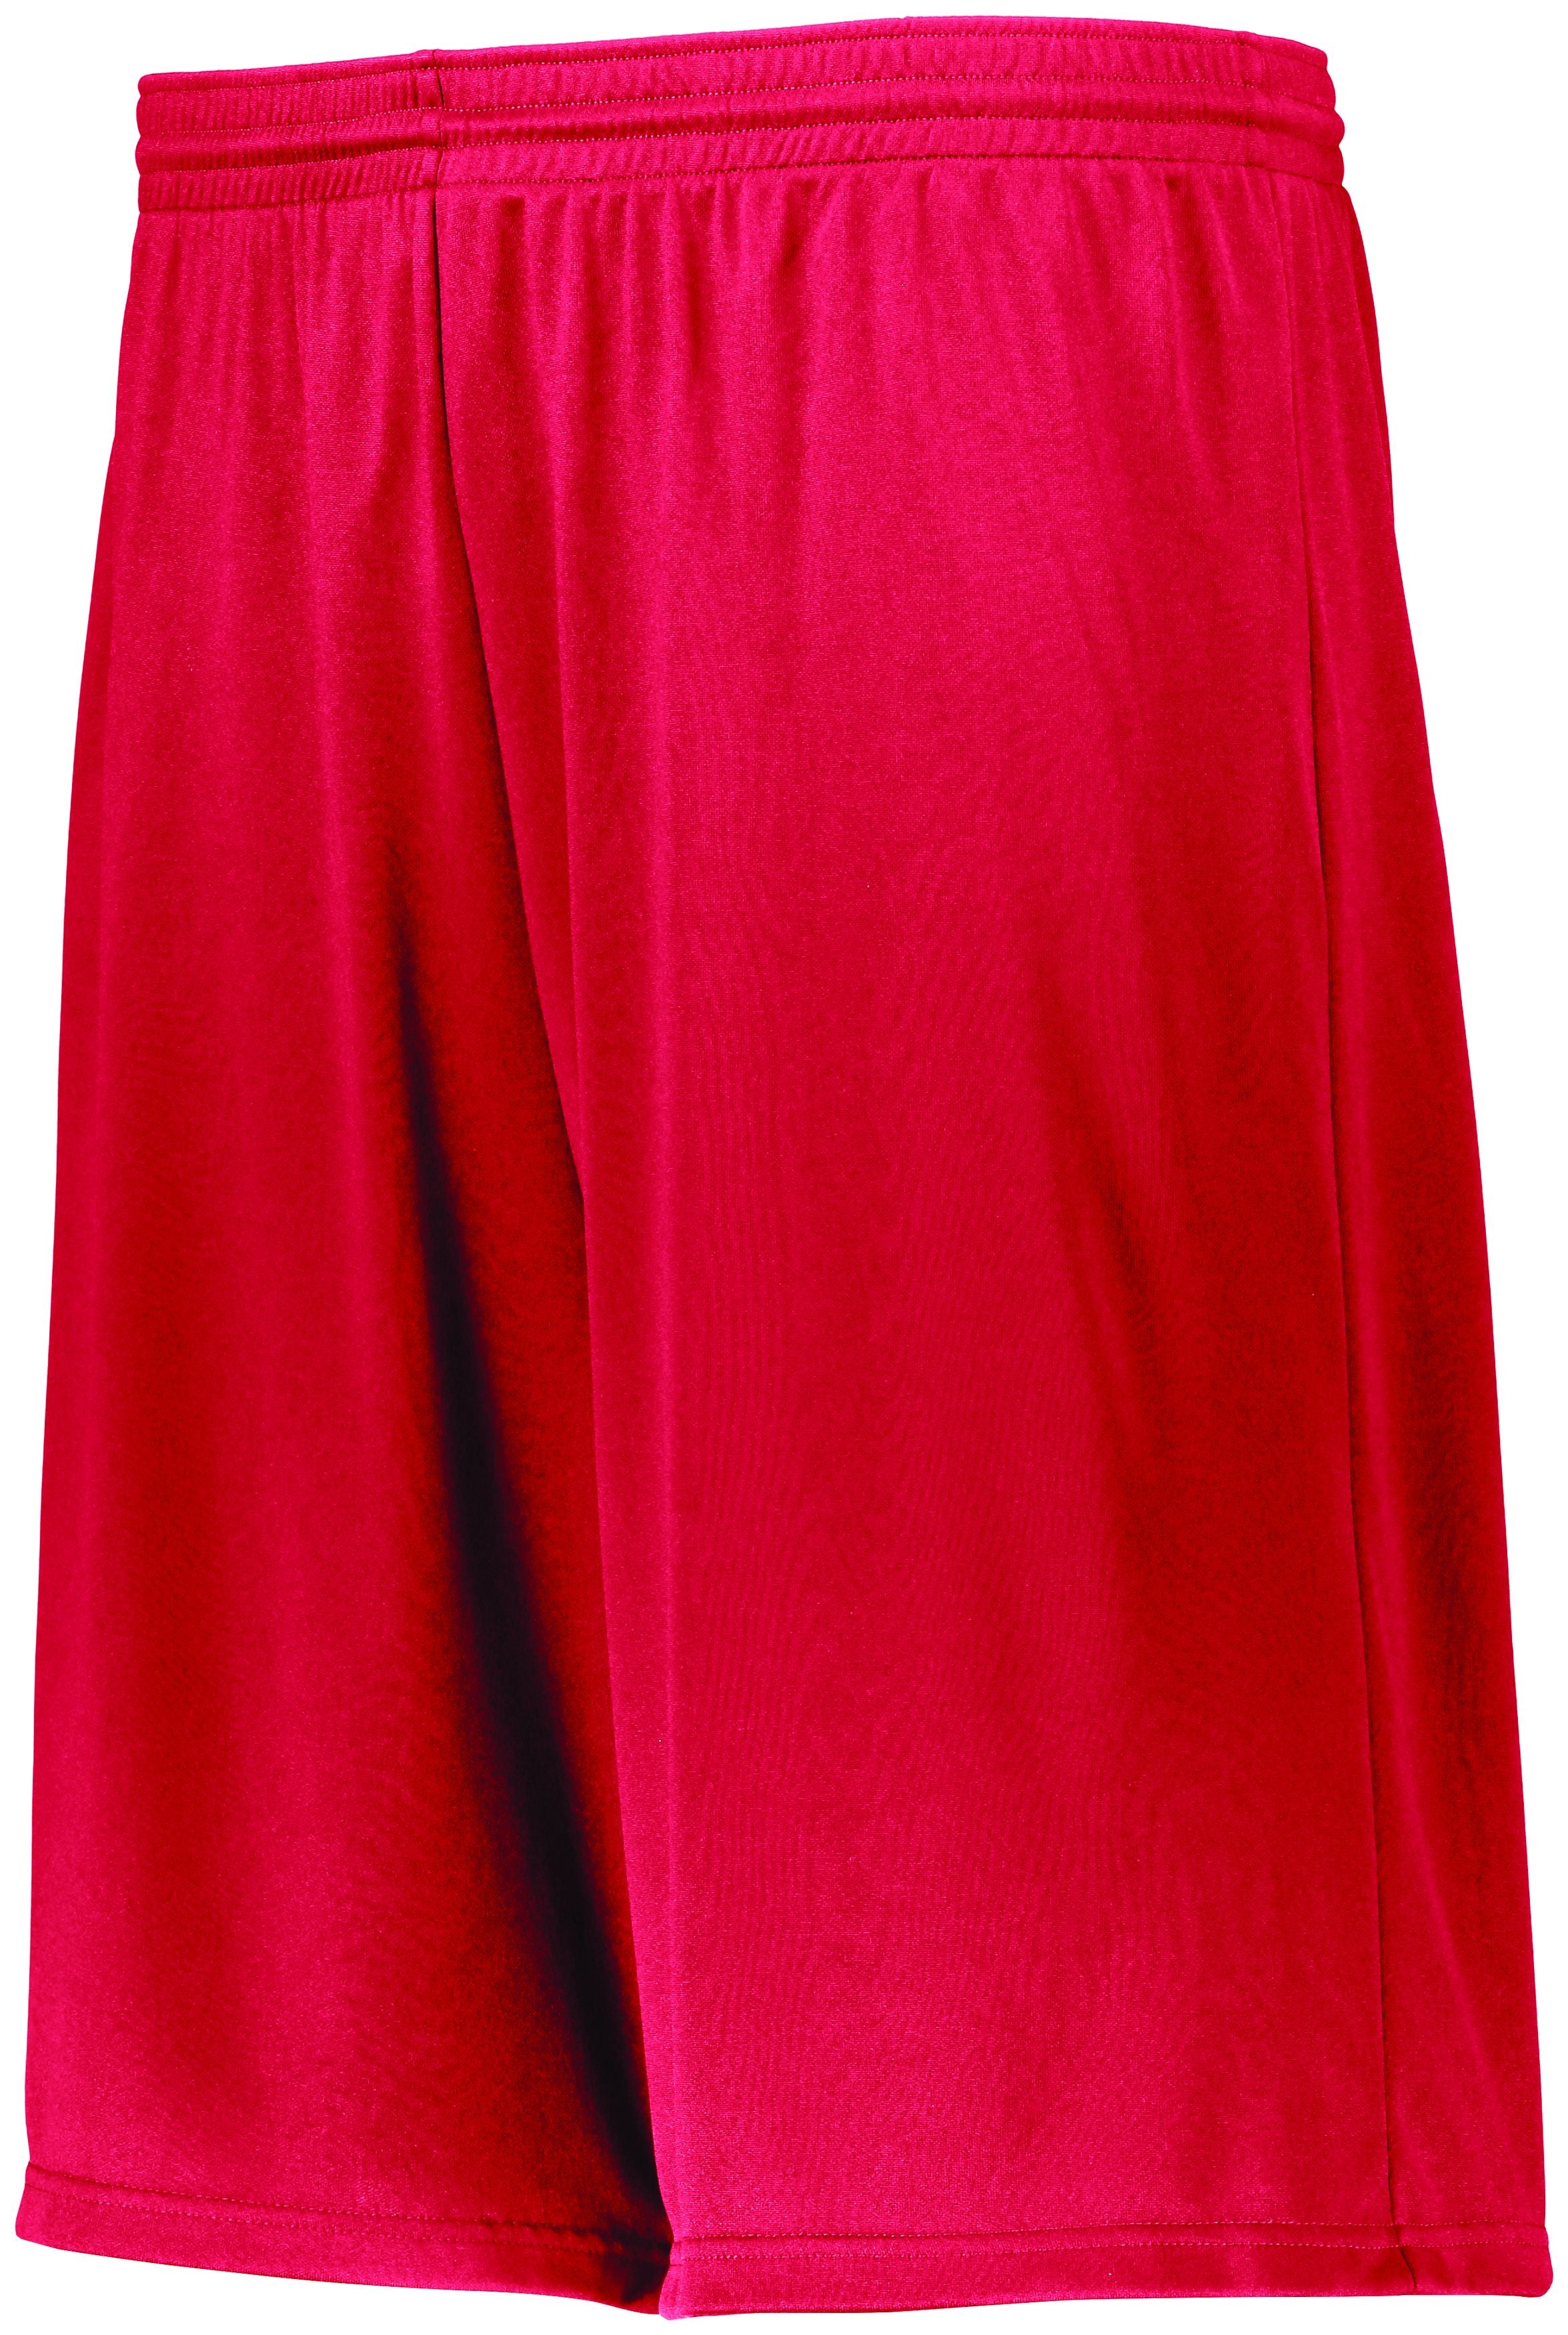 Augusta Sportswear Longer Length Attain Wicking Shorts in Red  -Part of the Adult, Adult-Shorts, Augusta-Products product lines at KanaleyCreations.com